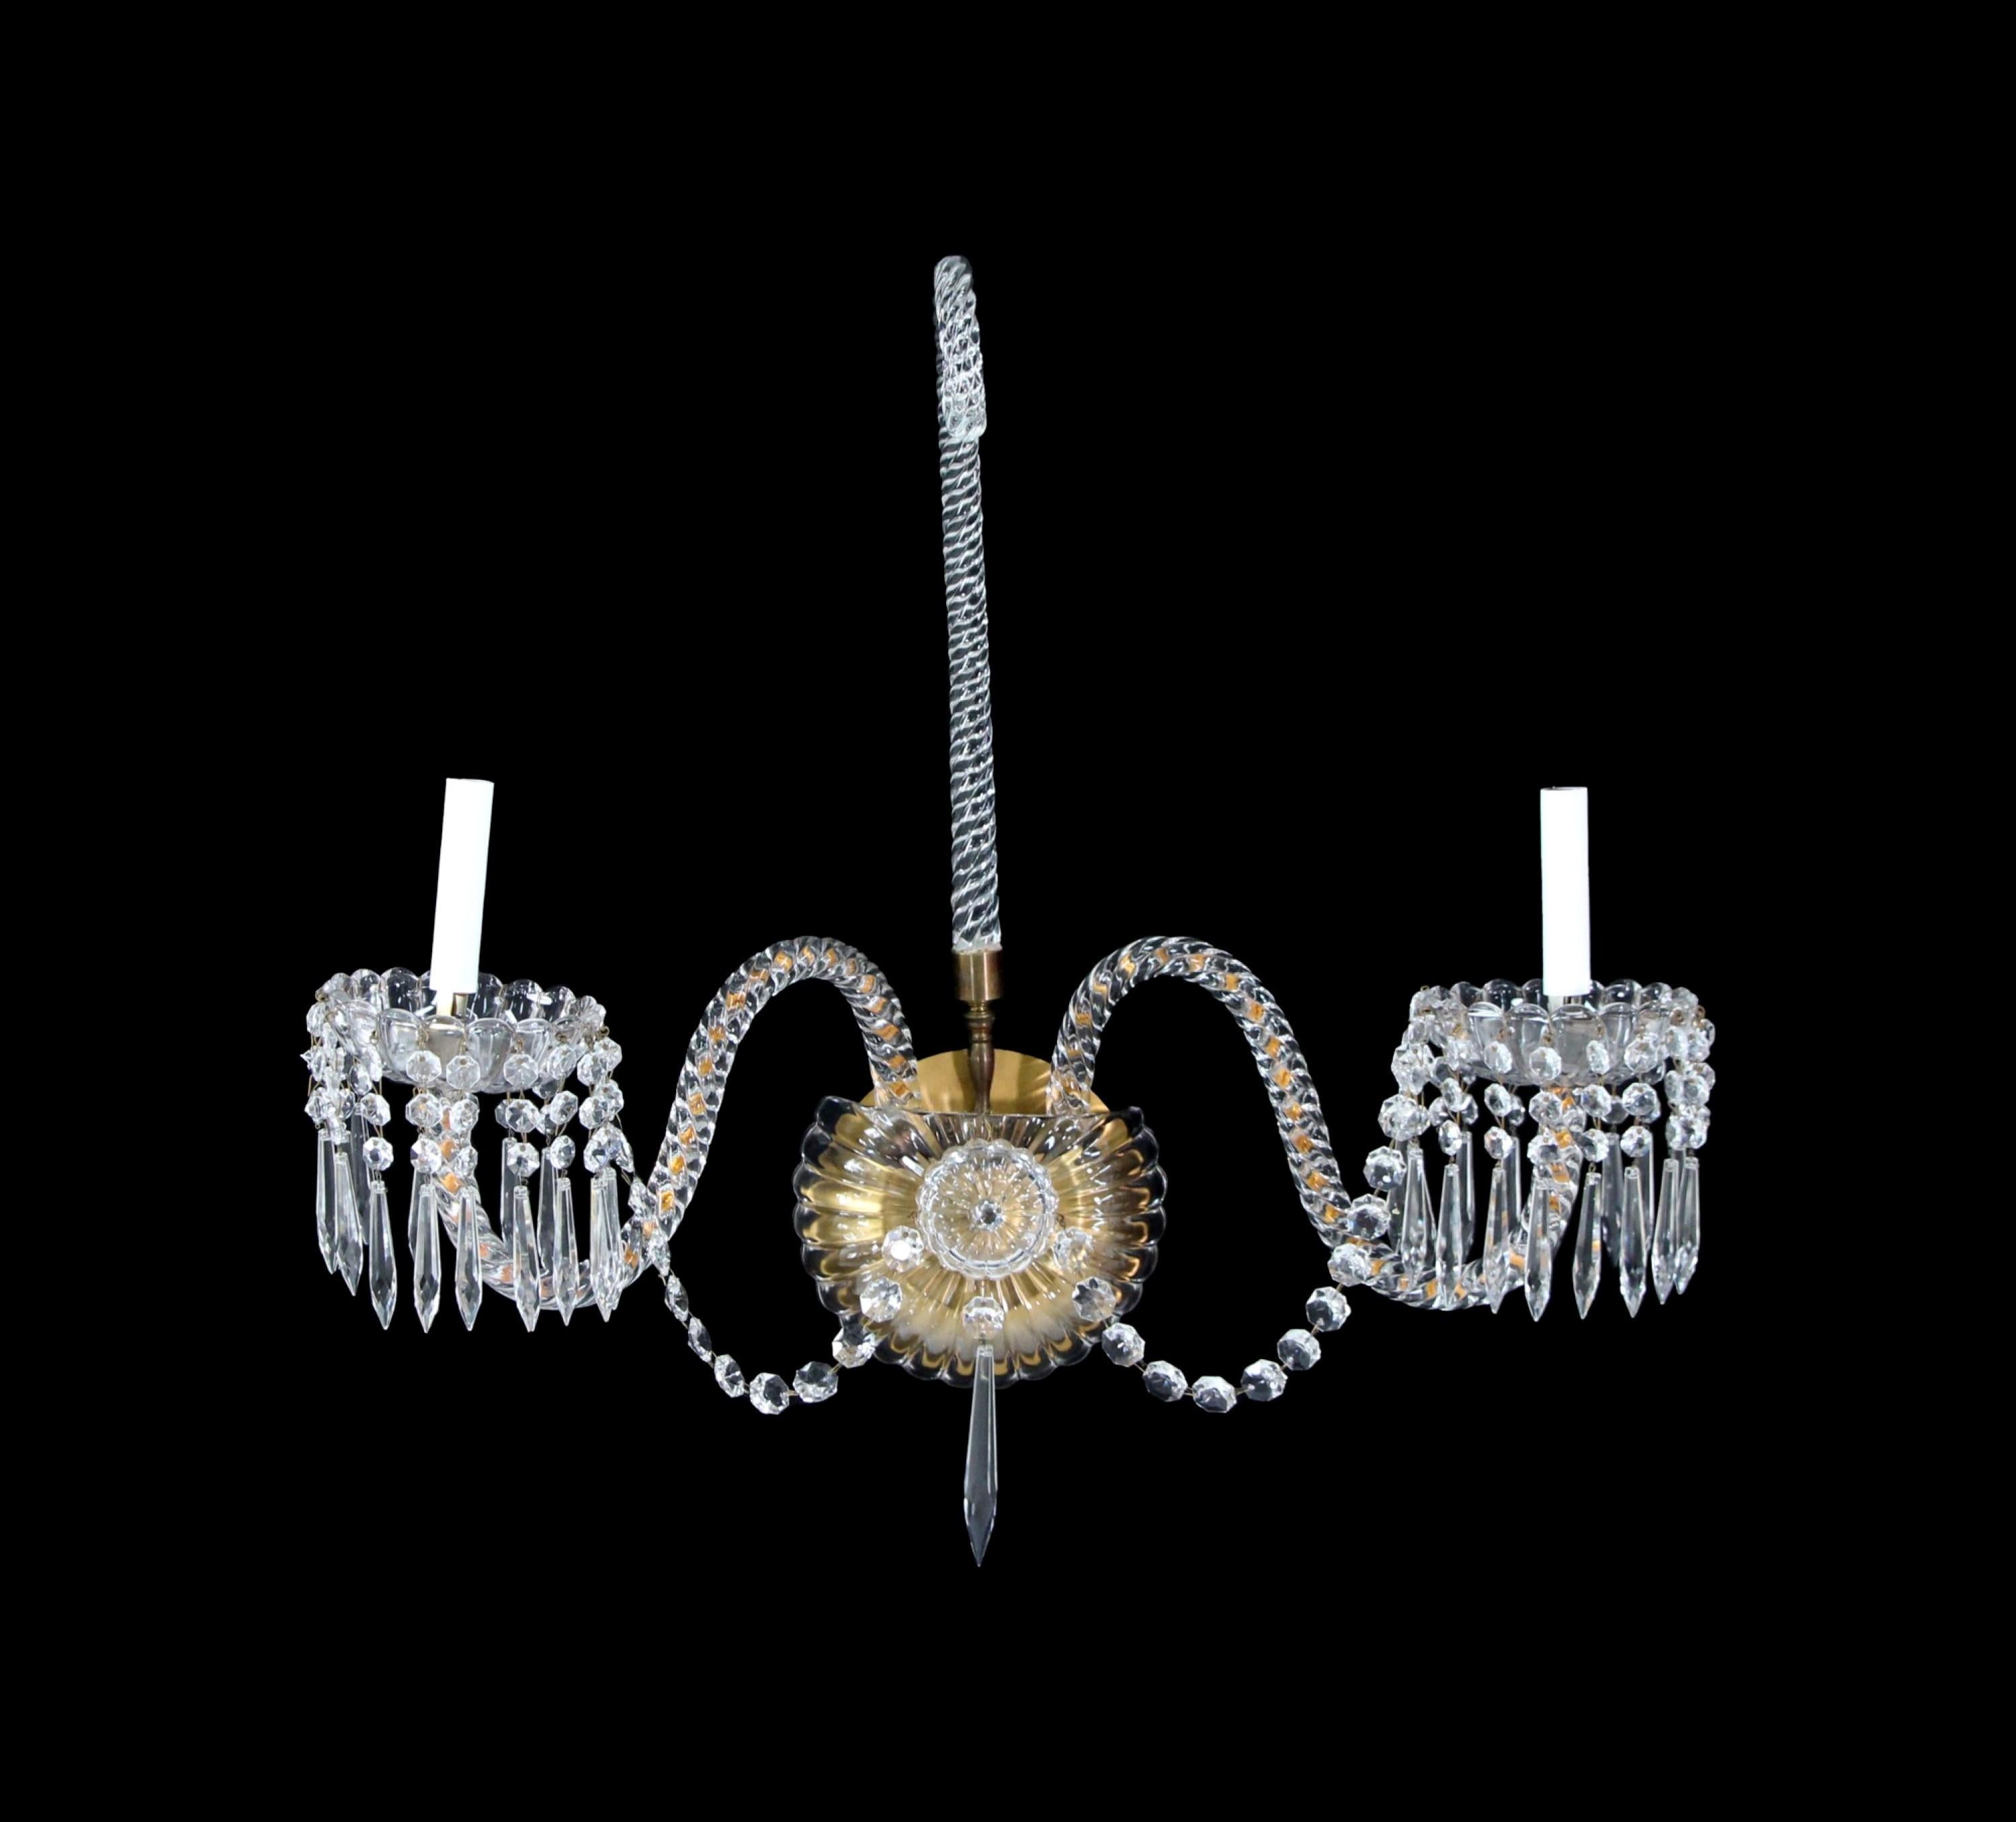 Crystal three arm wall sconce with an impressive amount of hanging crystals. This light is original to Hotel Pennsylvania which opened on January 25, 1919 in New York City. Cleaned and rewired. Small quantity available at time of posting. Priced